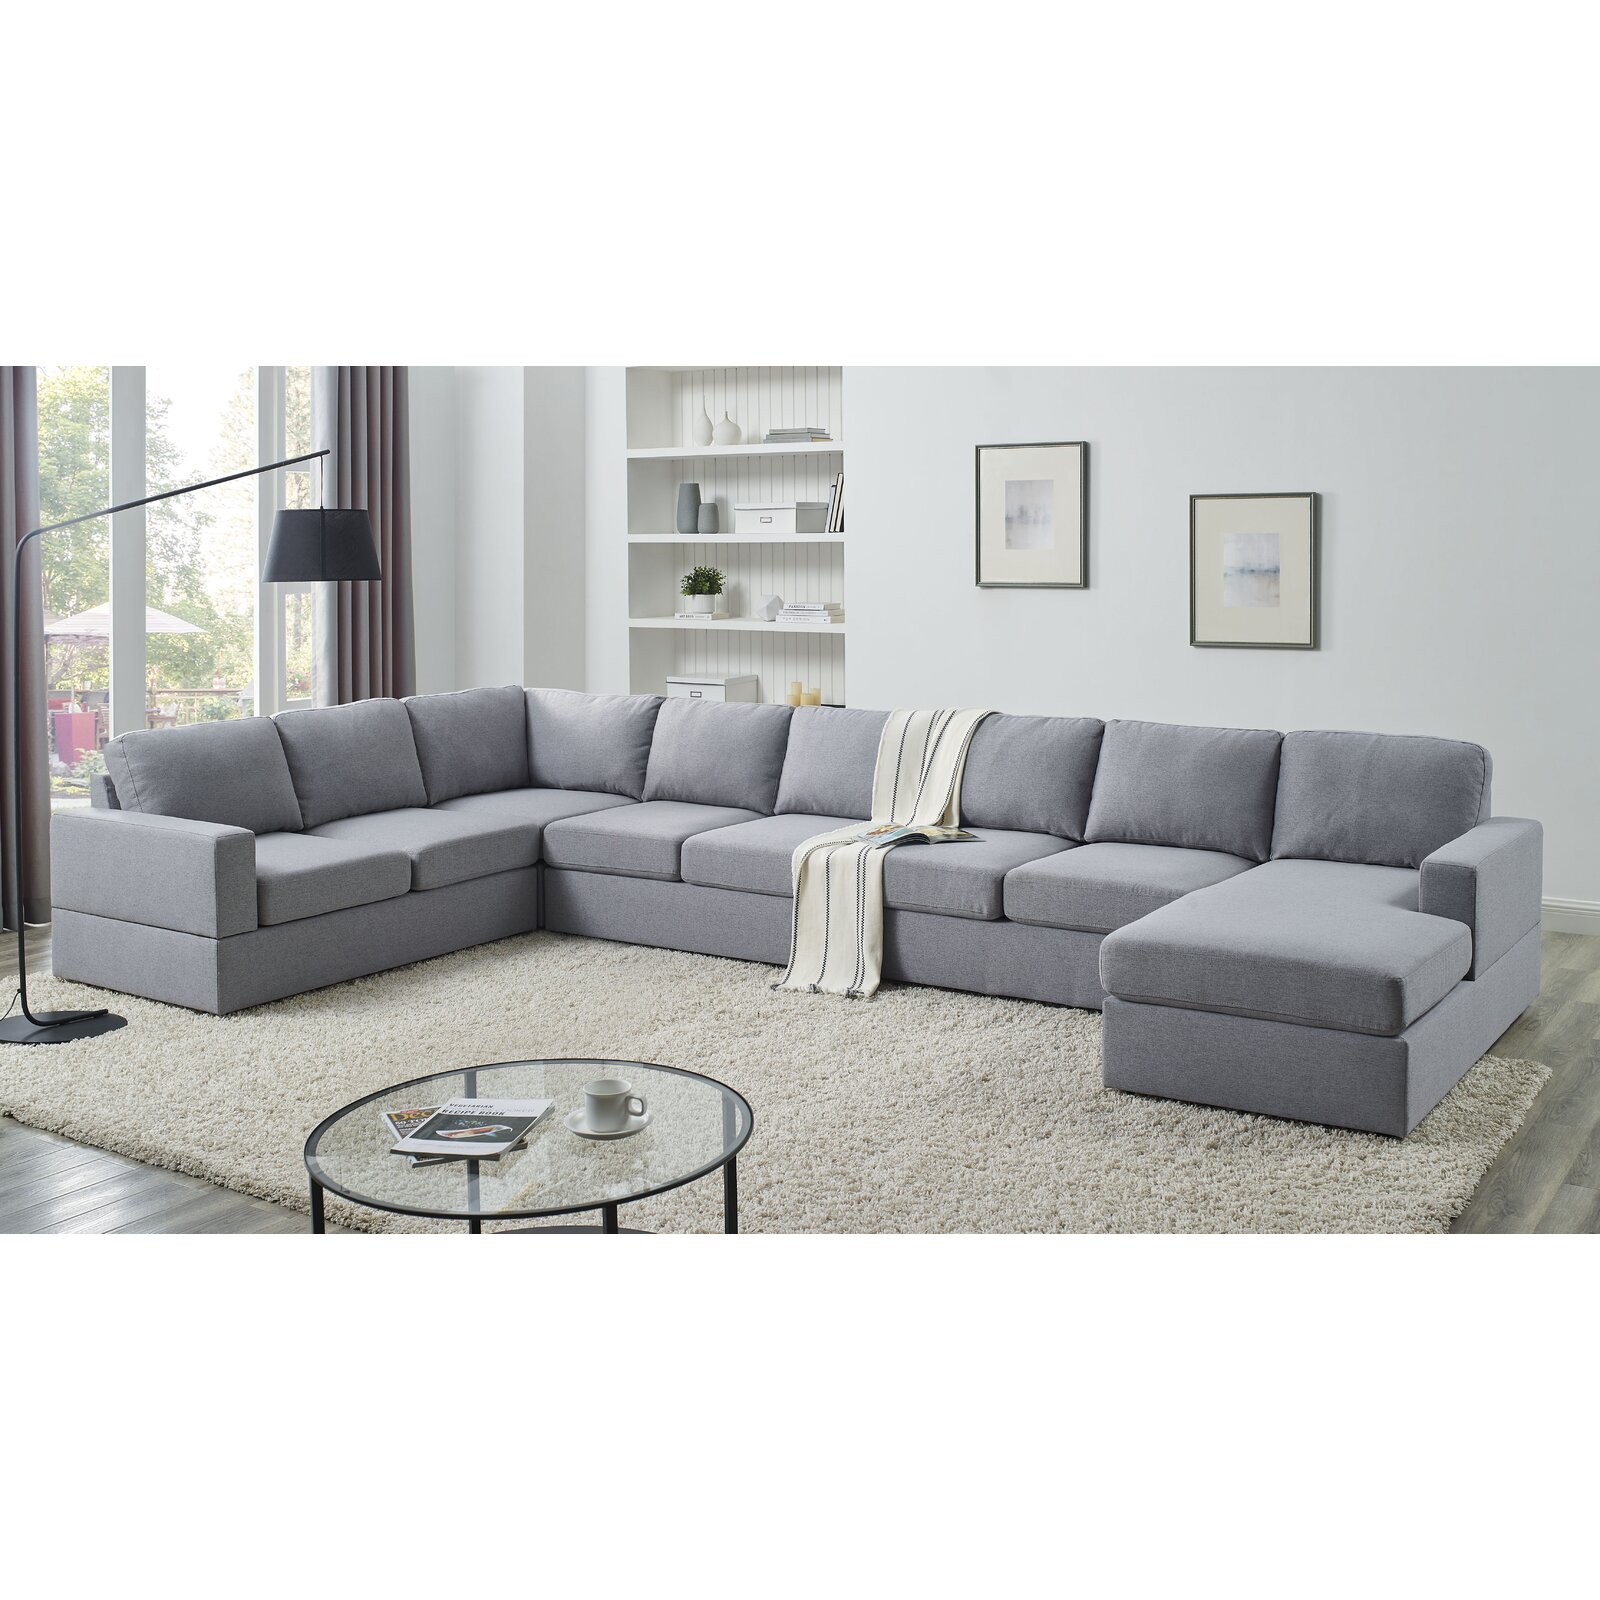 Greyleigh Ivybridge 5 - Piece Upholstered Sectional & Reviews